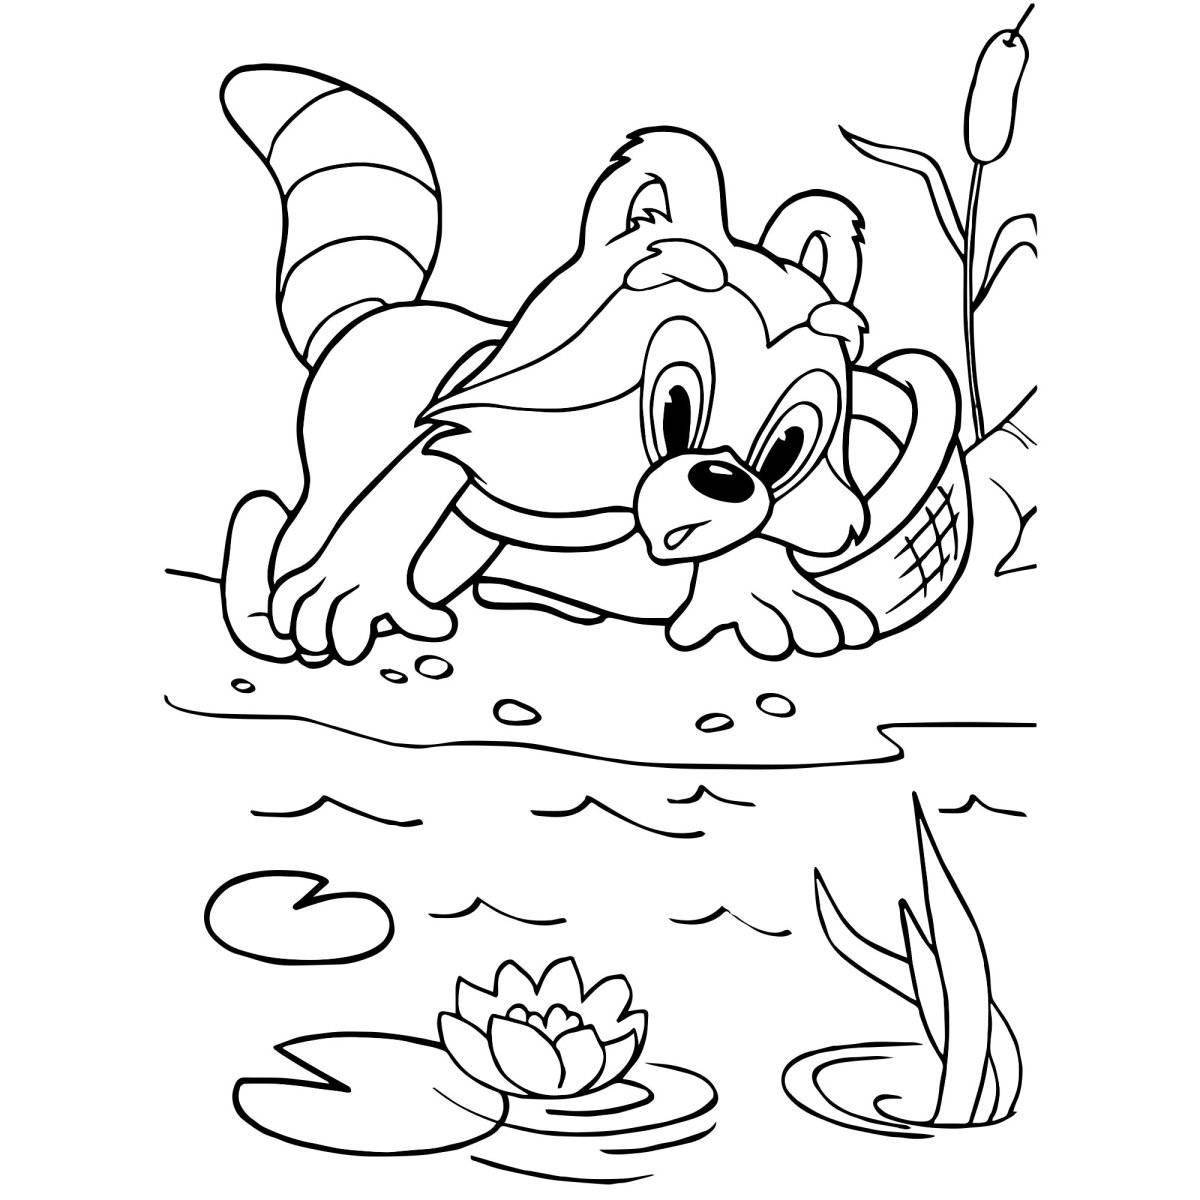 Color-explosion raccoon coloring page for children